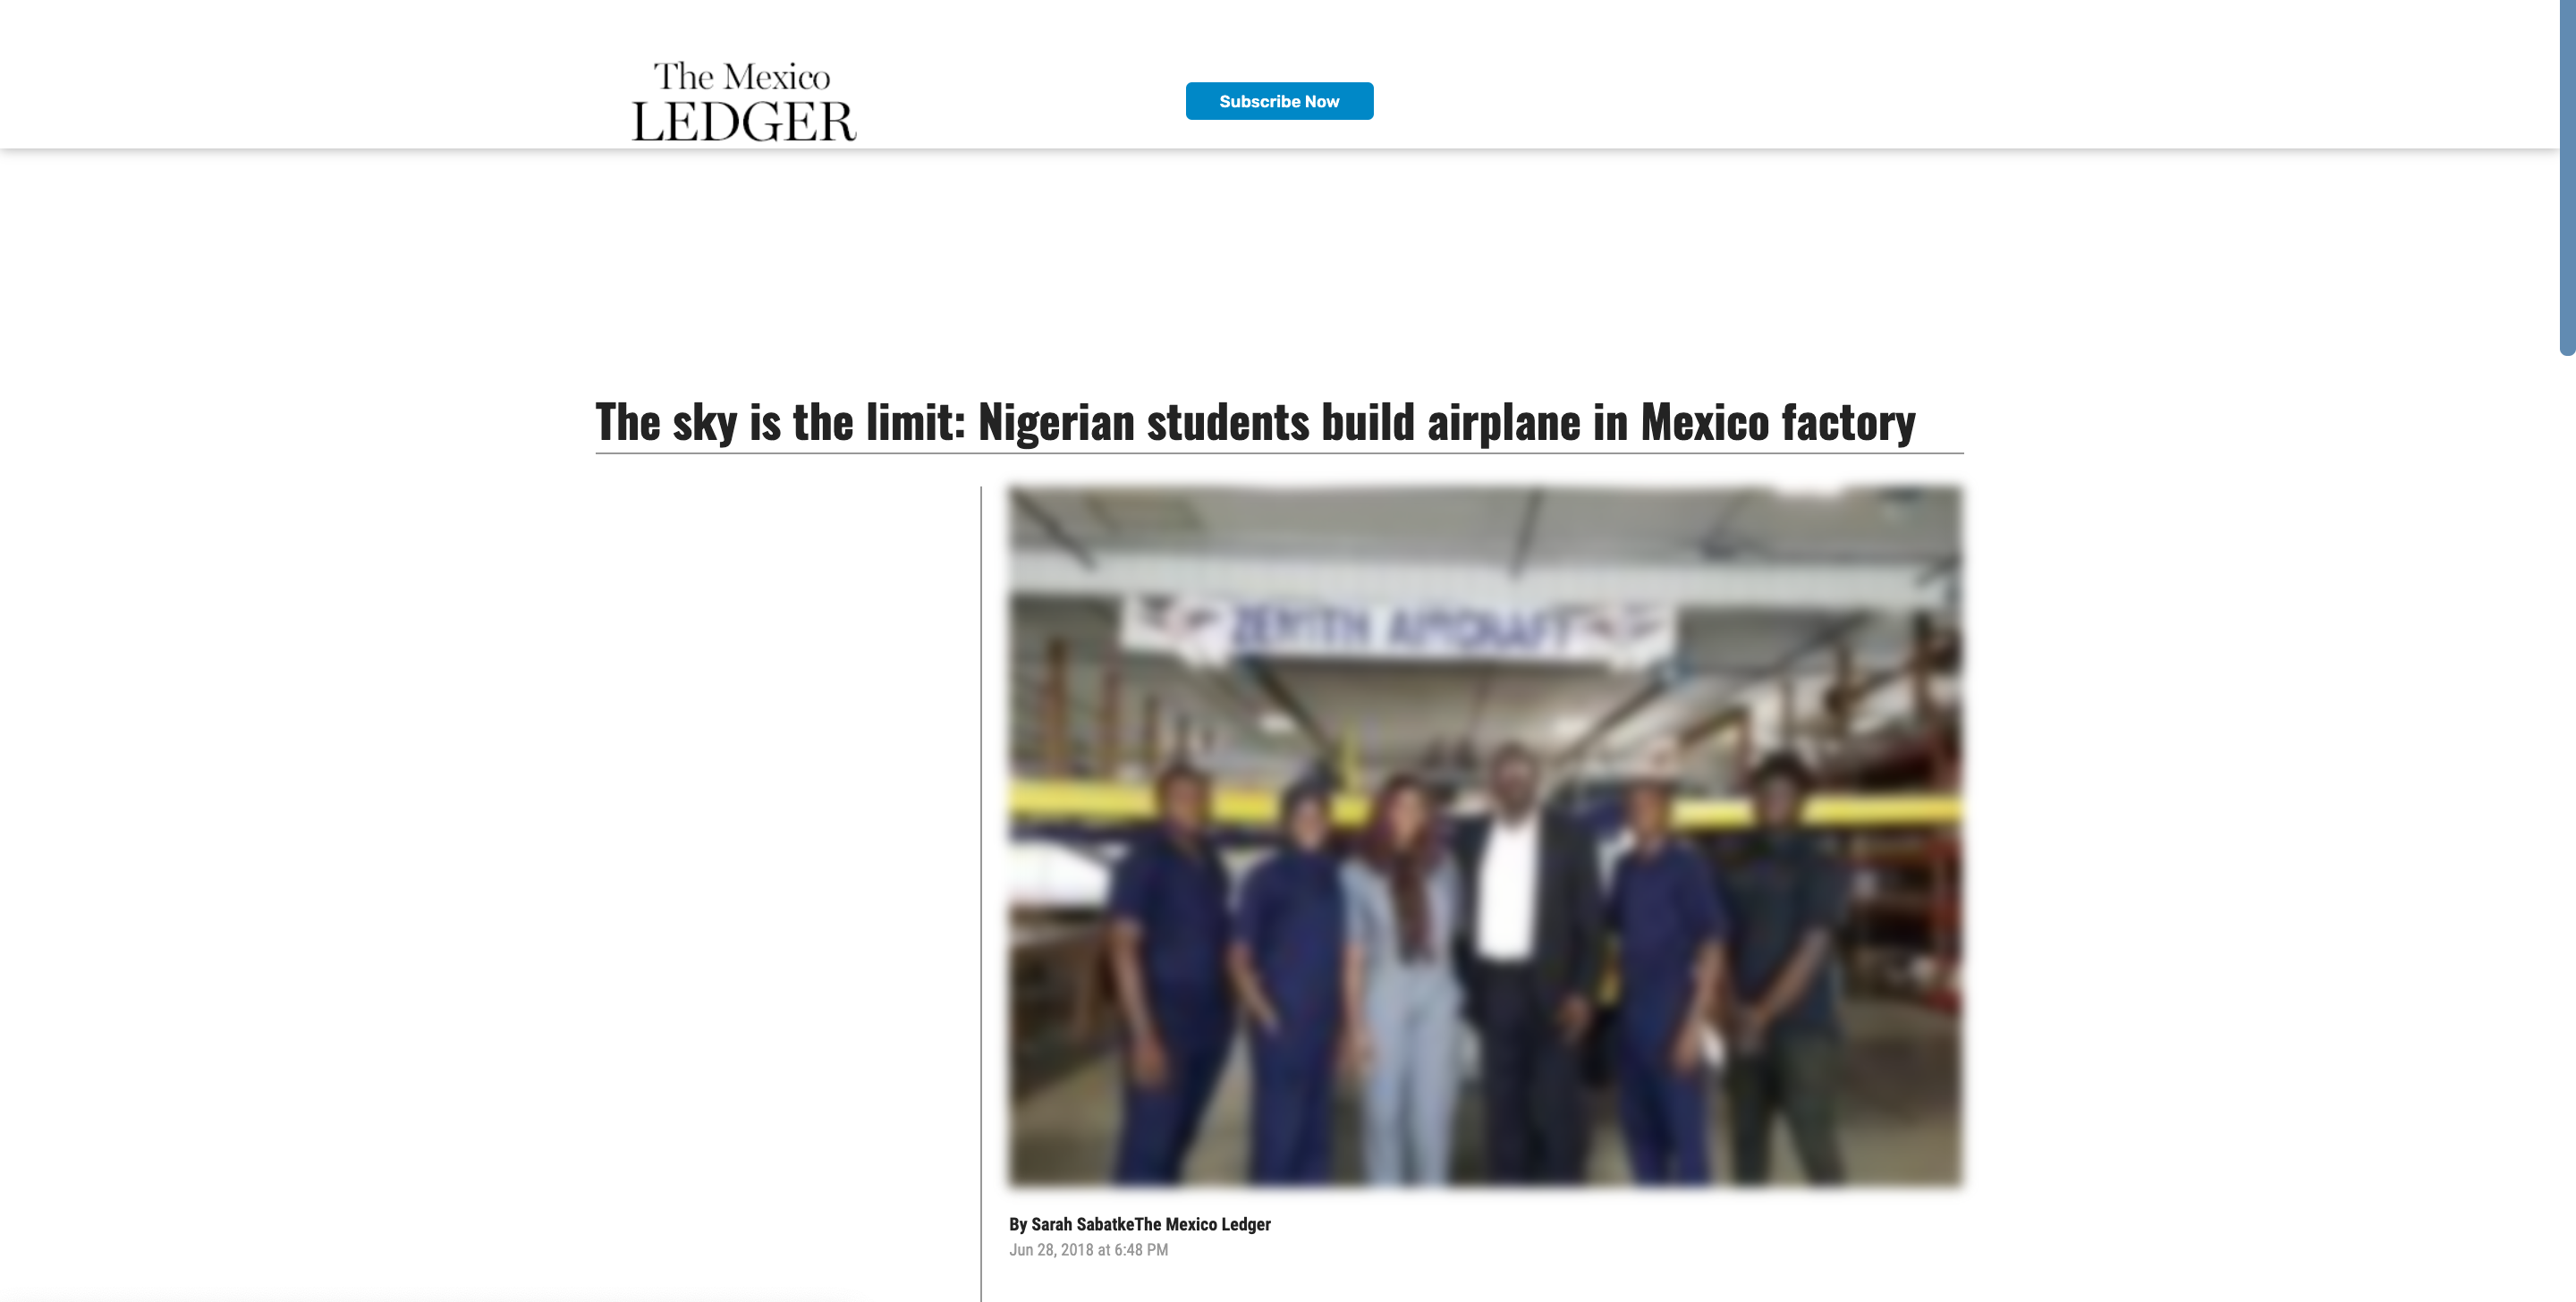 Thumbnail of The sky is the limit: Nigerian students build airplane in Mexico factory